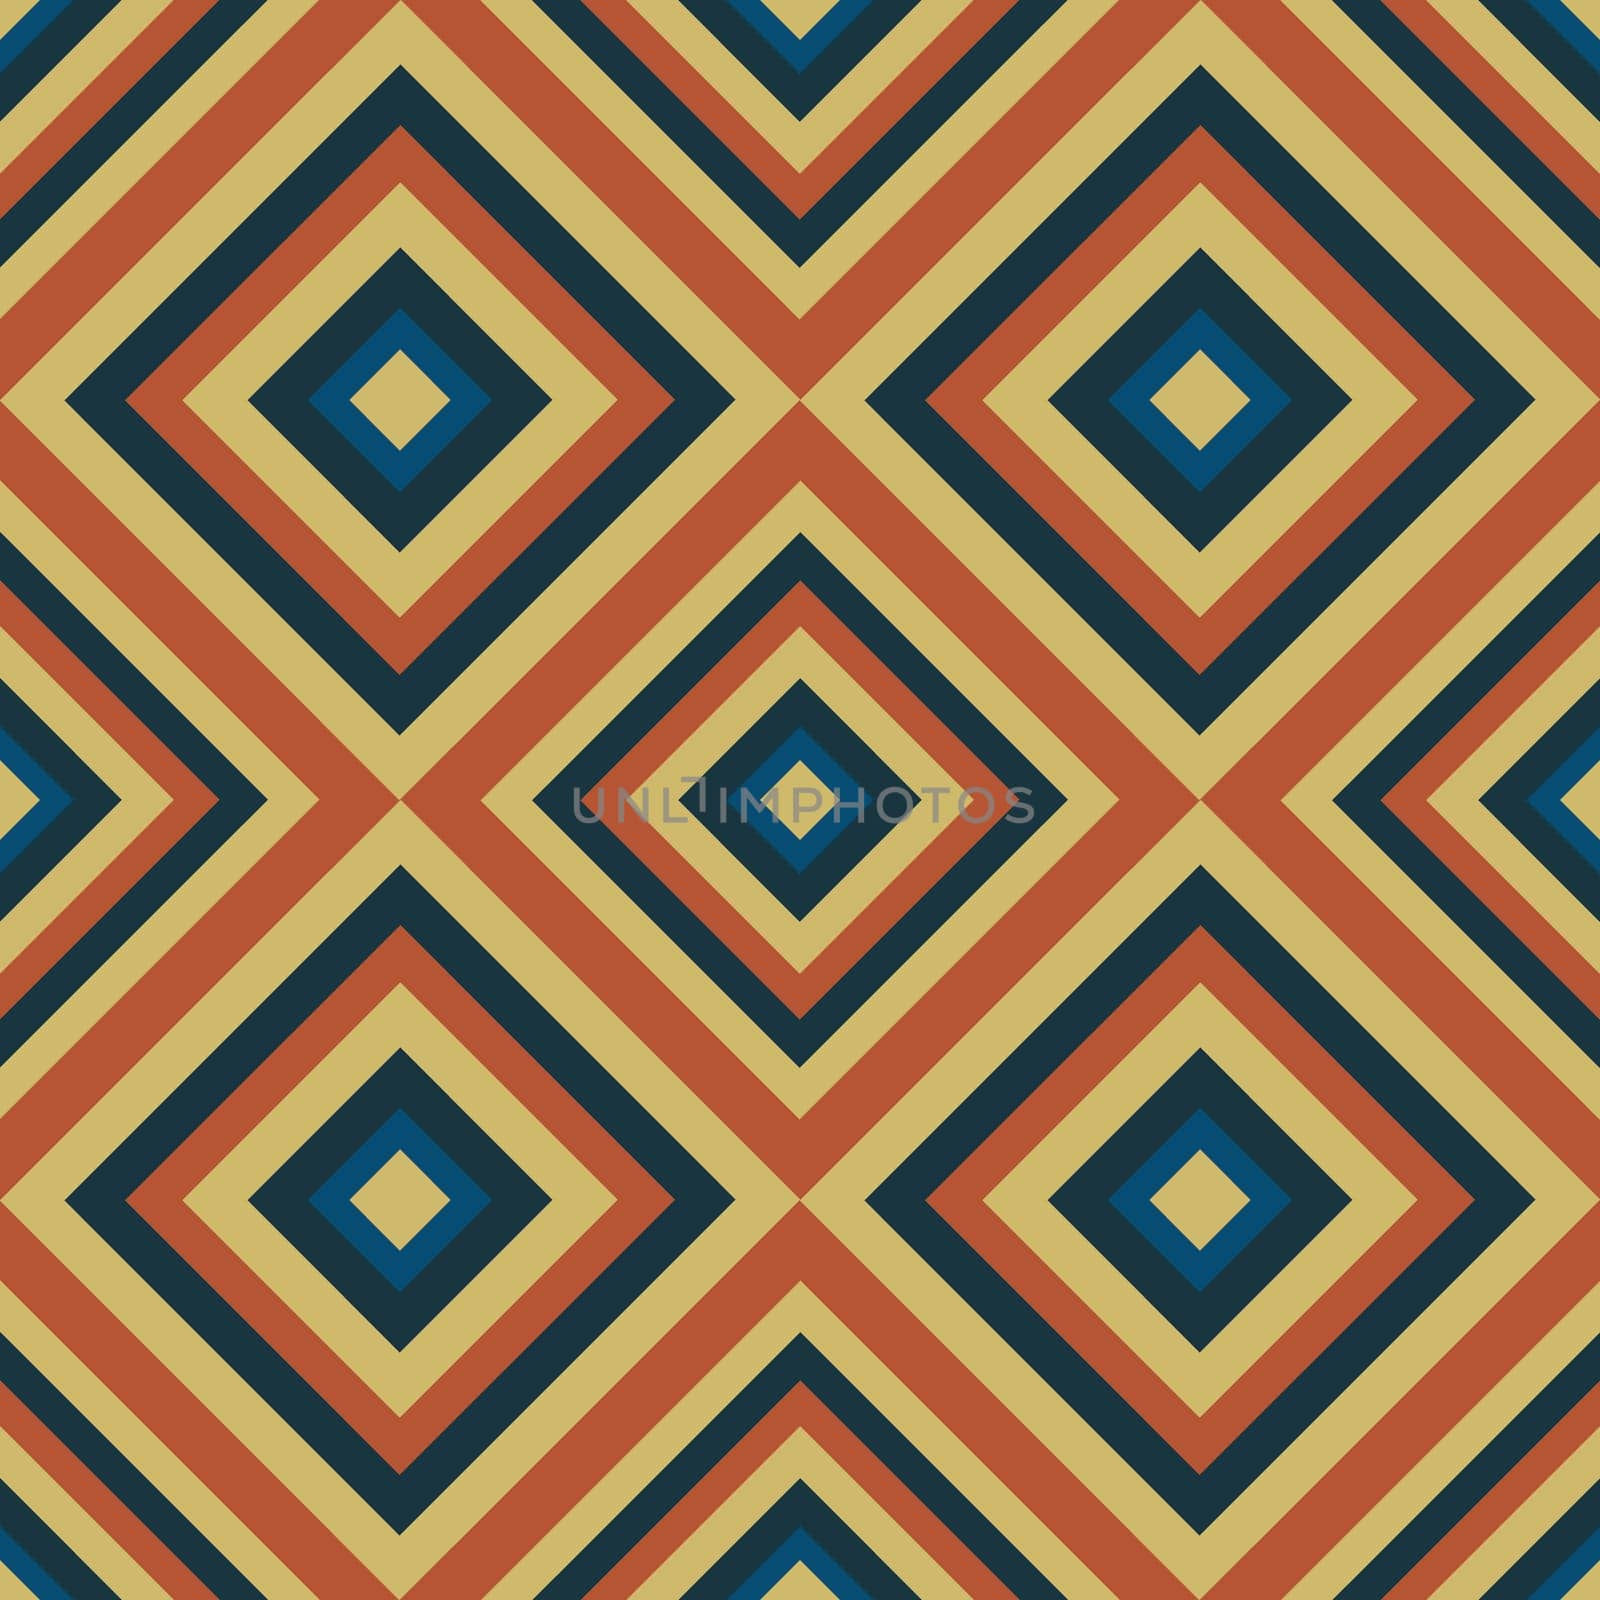 Vintage aesthetic pattern with triangles in the style of the 70s and 60 by Dustick